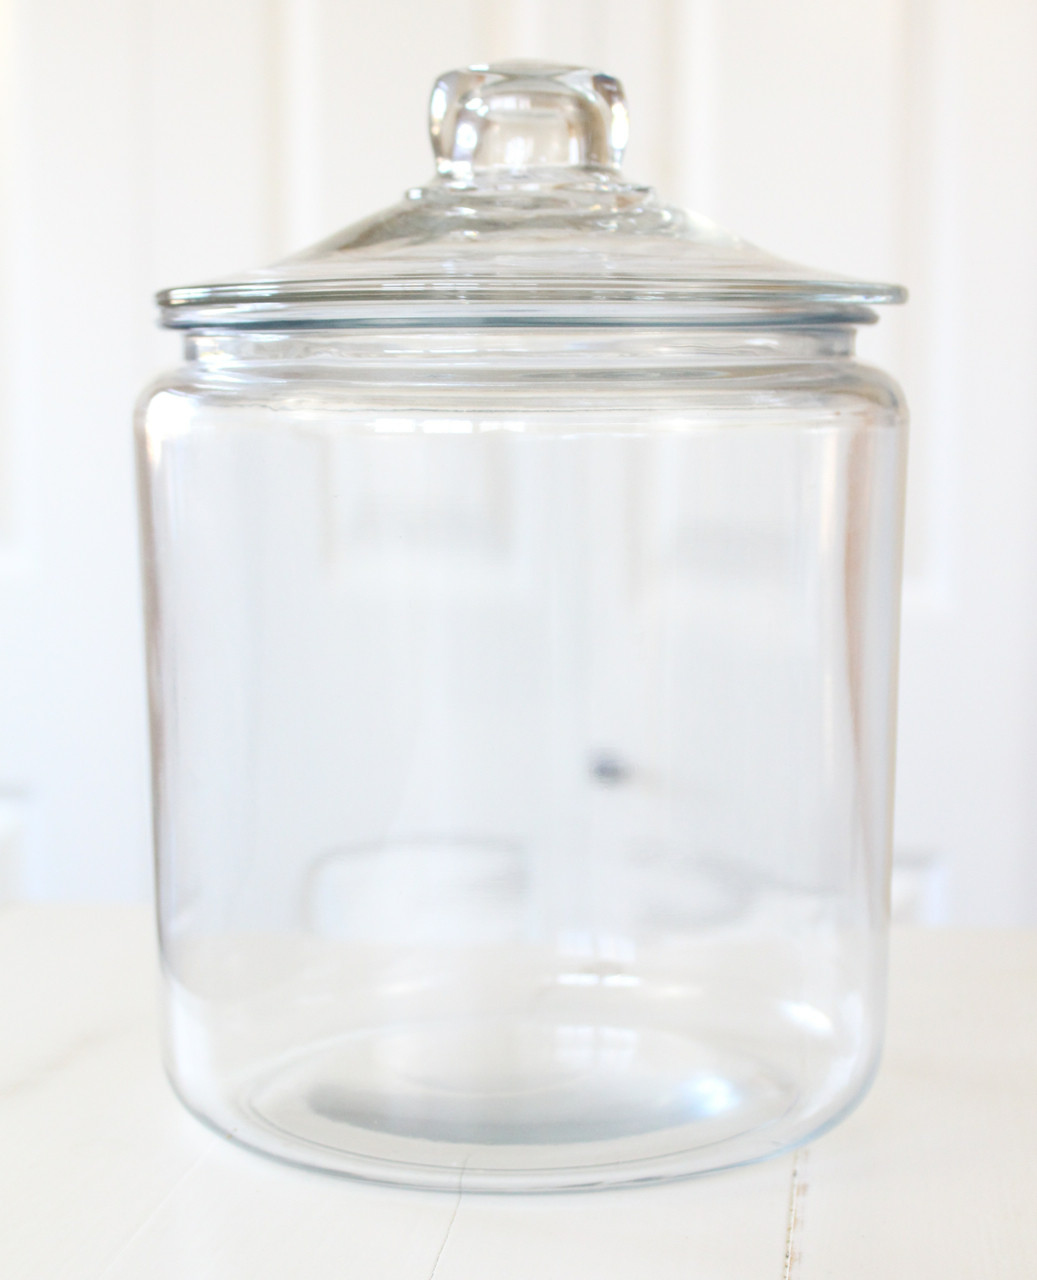 kate spade glass vase of get organized gift in a jar intended for fillmore jar